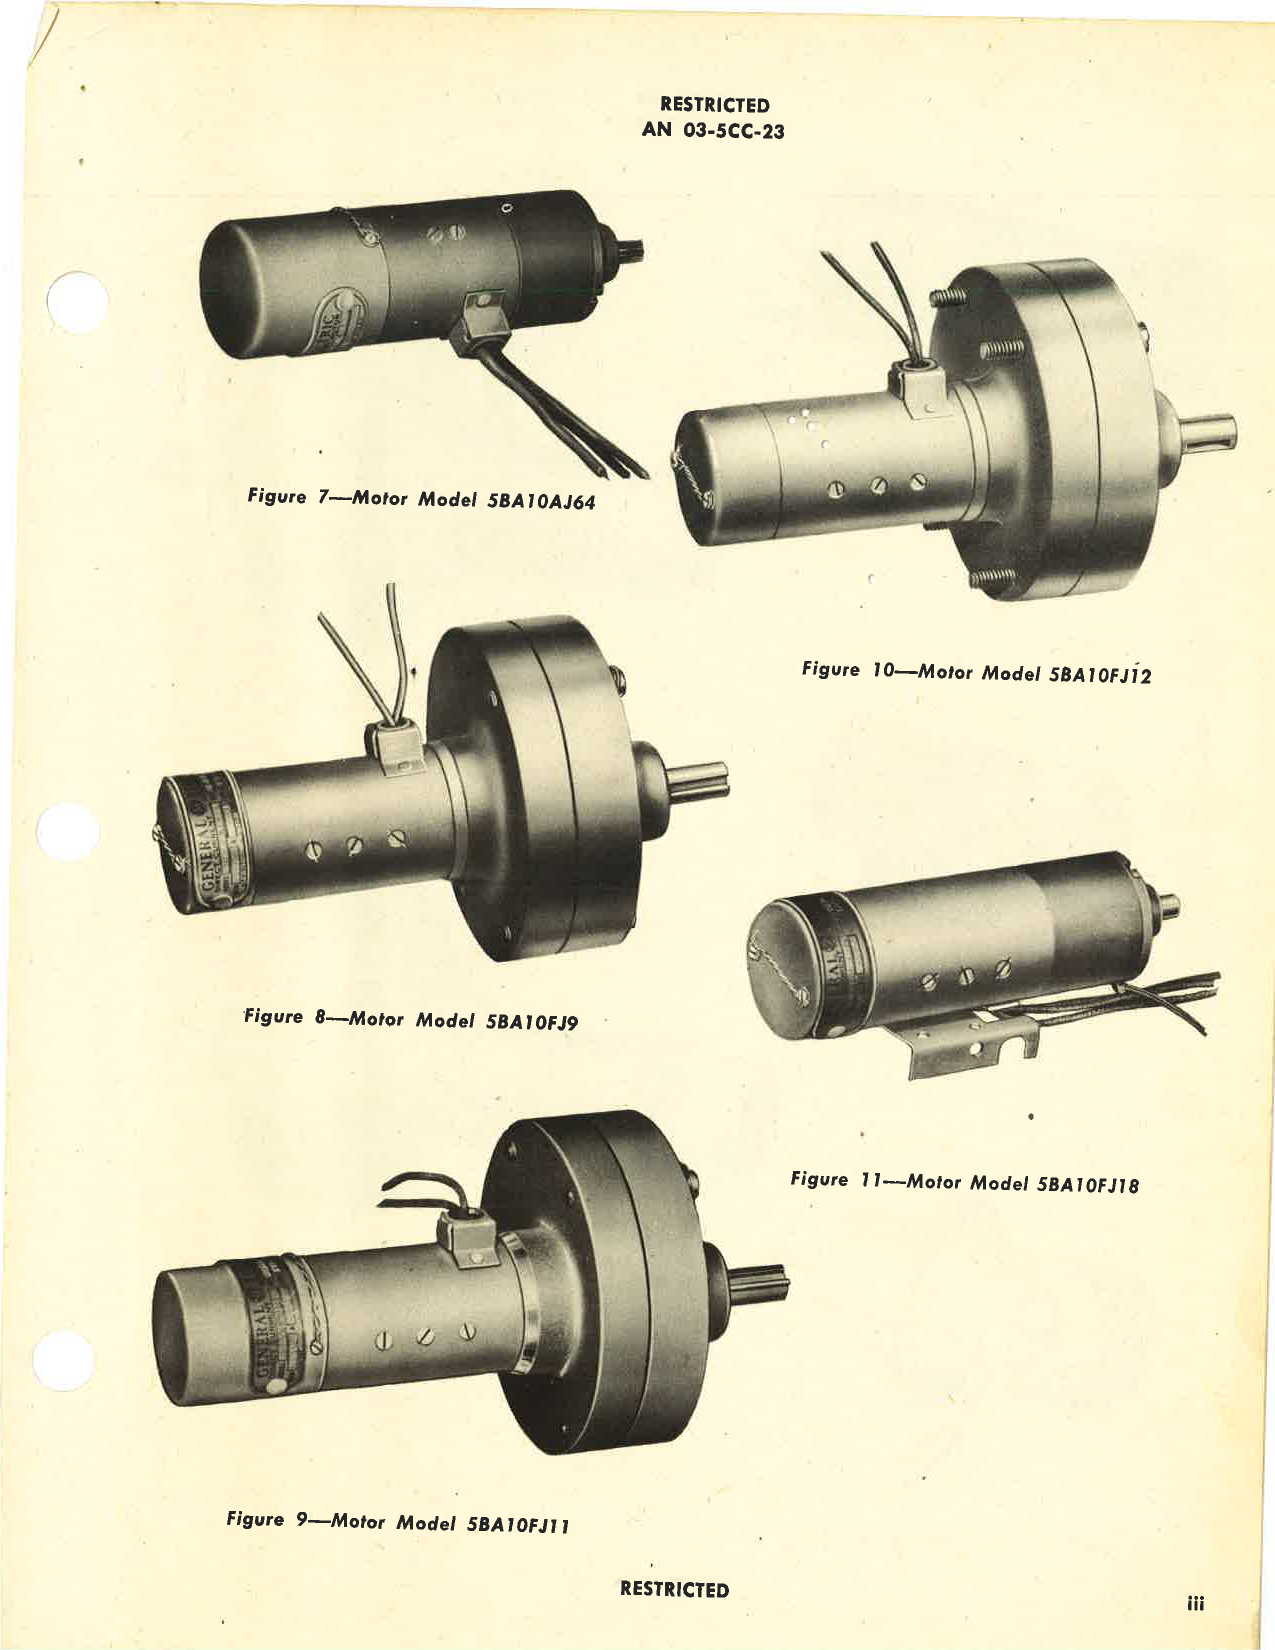 Sample page 5 from AirCorps Library document: Handbook of Instructions with Parts Catalog for Aircraft Electric Motors Model 5BA10 Series